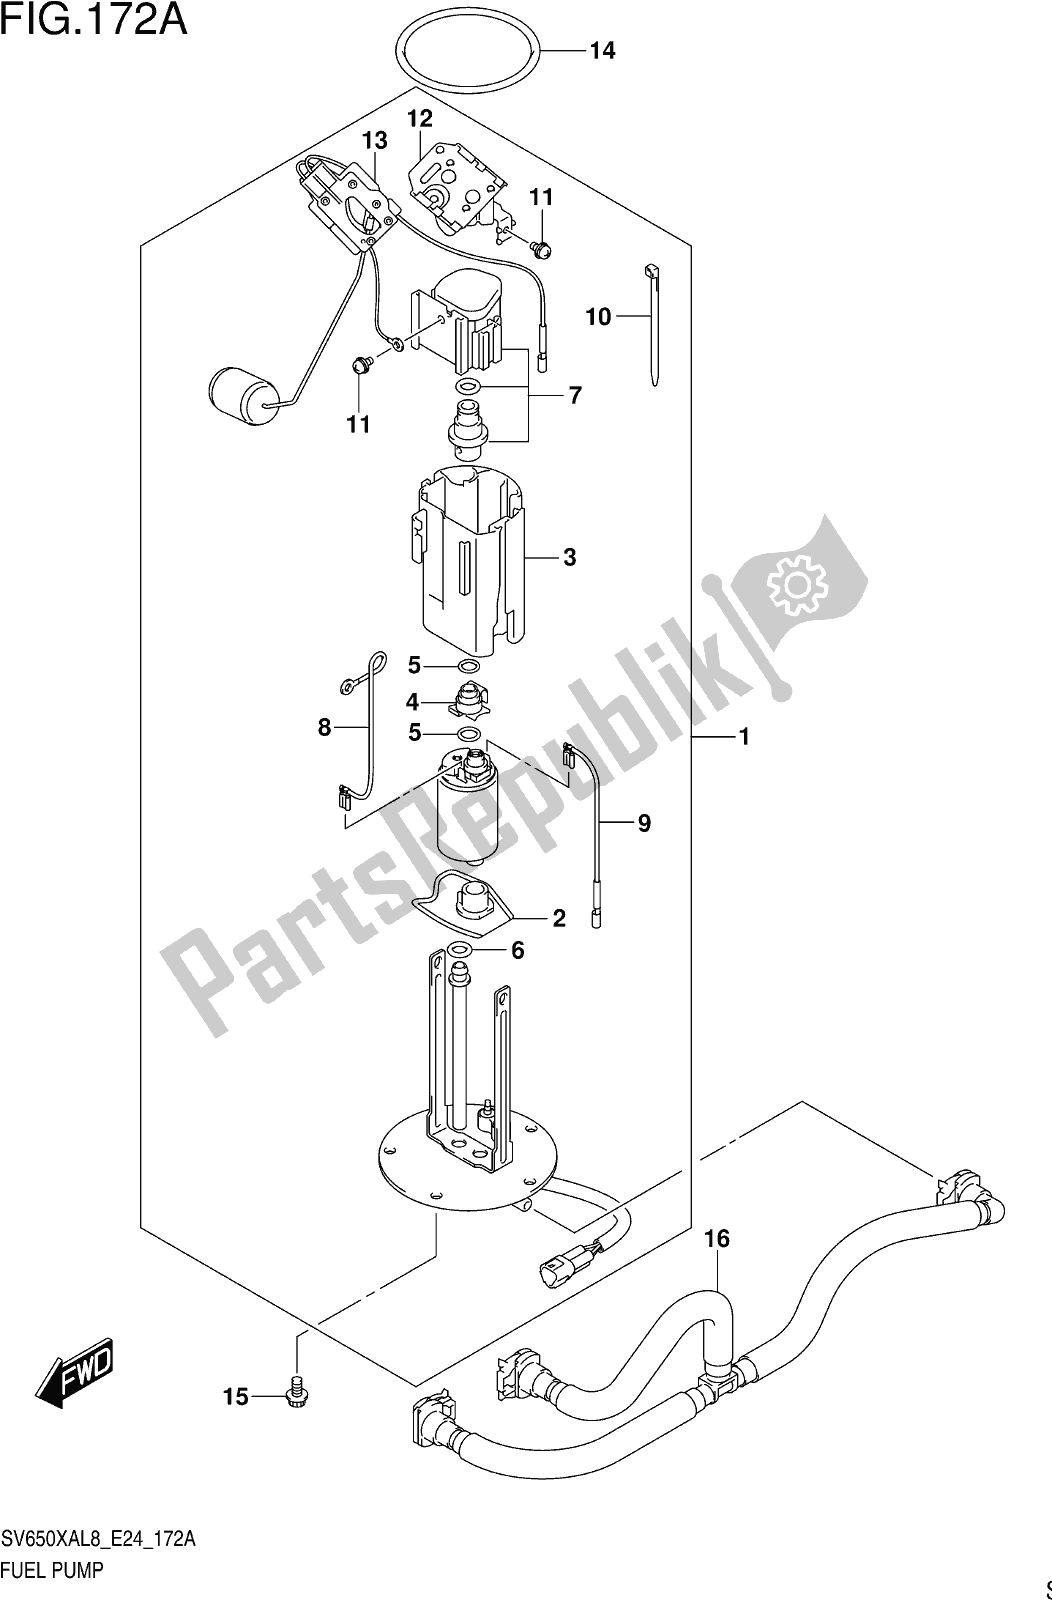 All parts for the Fig. 172a Fuel Pump of the Suzuki SV 650 XA 2018